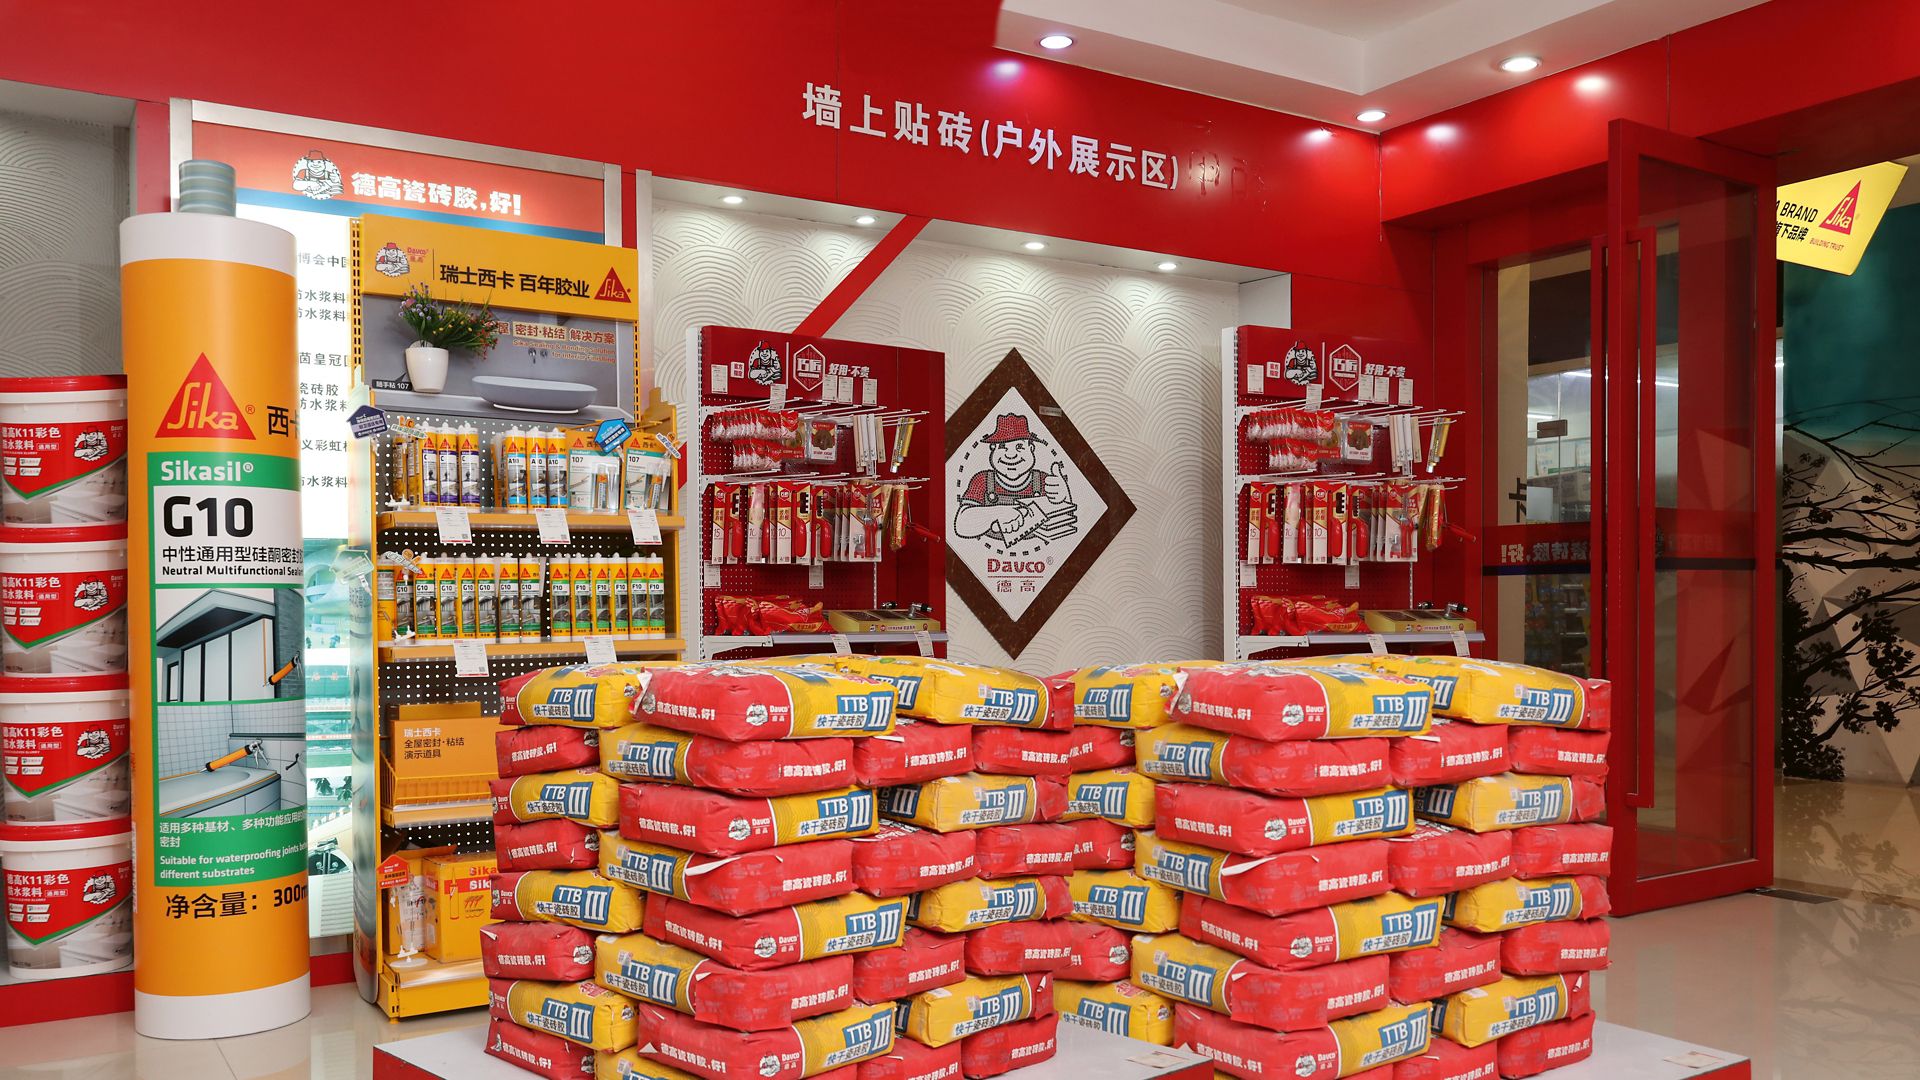 By the end of 2019, Sika had established more than 2,000 shop-in-shops in China